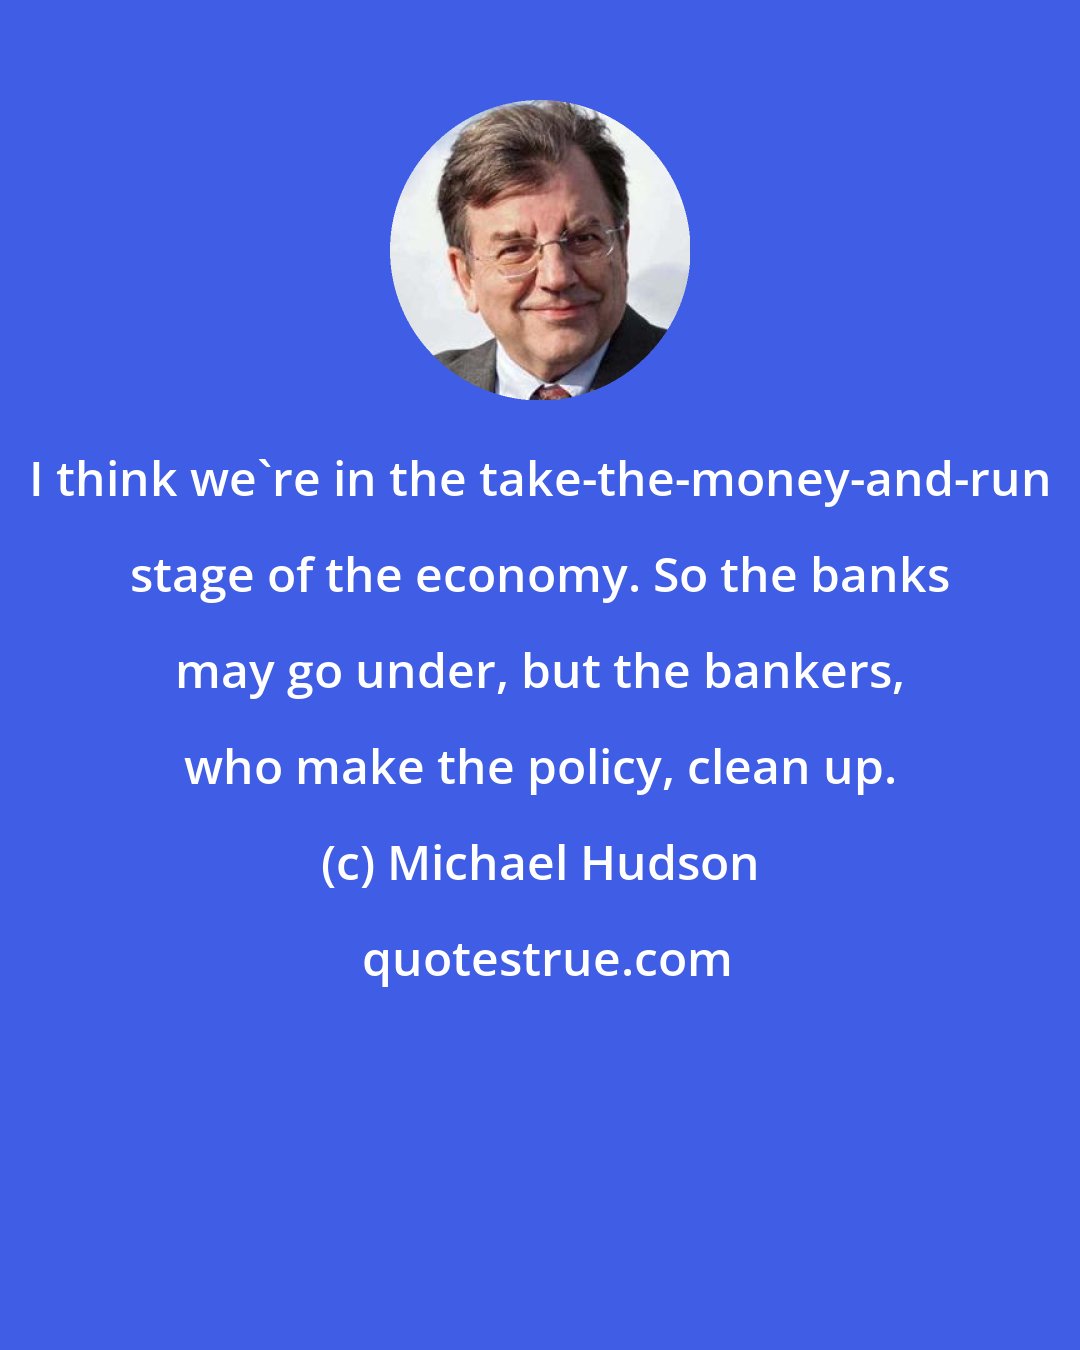 Michael Hudson: I think we're in the take-the-money-and-run stage of the economy. So the banks may go under, but the bankers, who make the policy, clean up.